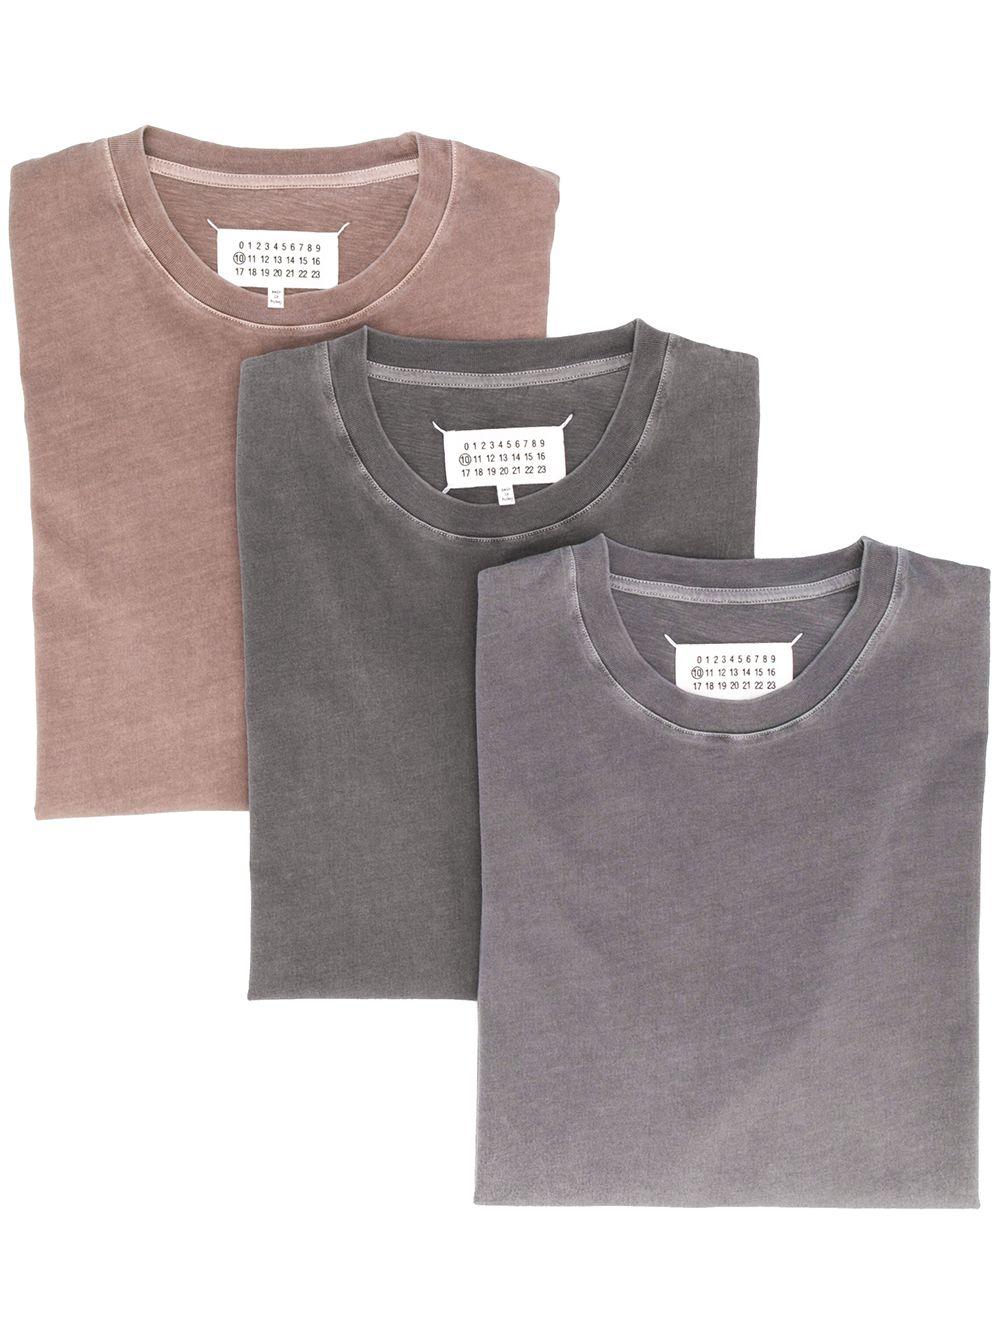 Maison Margiela Cotton 3-pack Crew Neck T-shirts in Grey (Gray) for Men